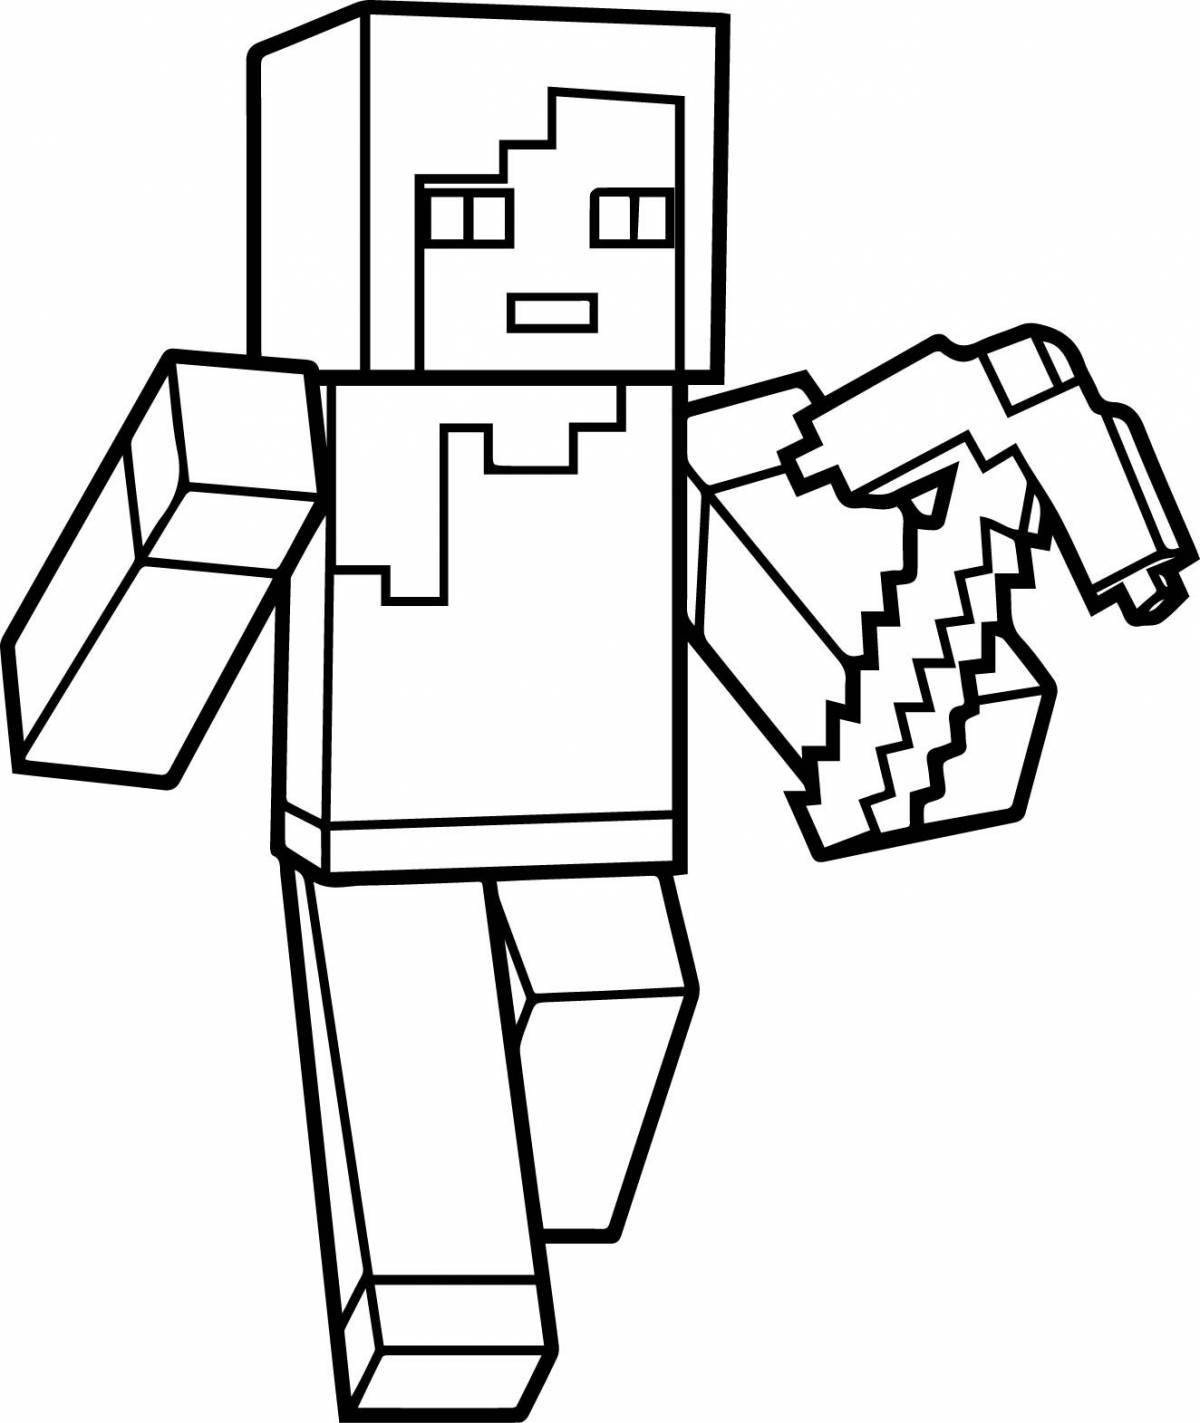 Exciting minecraft armor coloring page